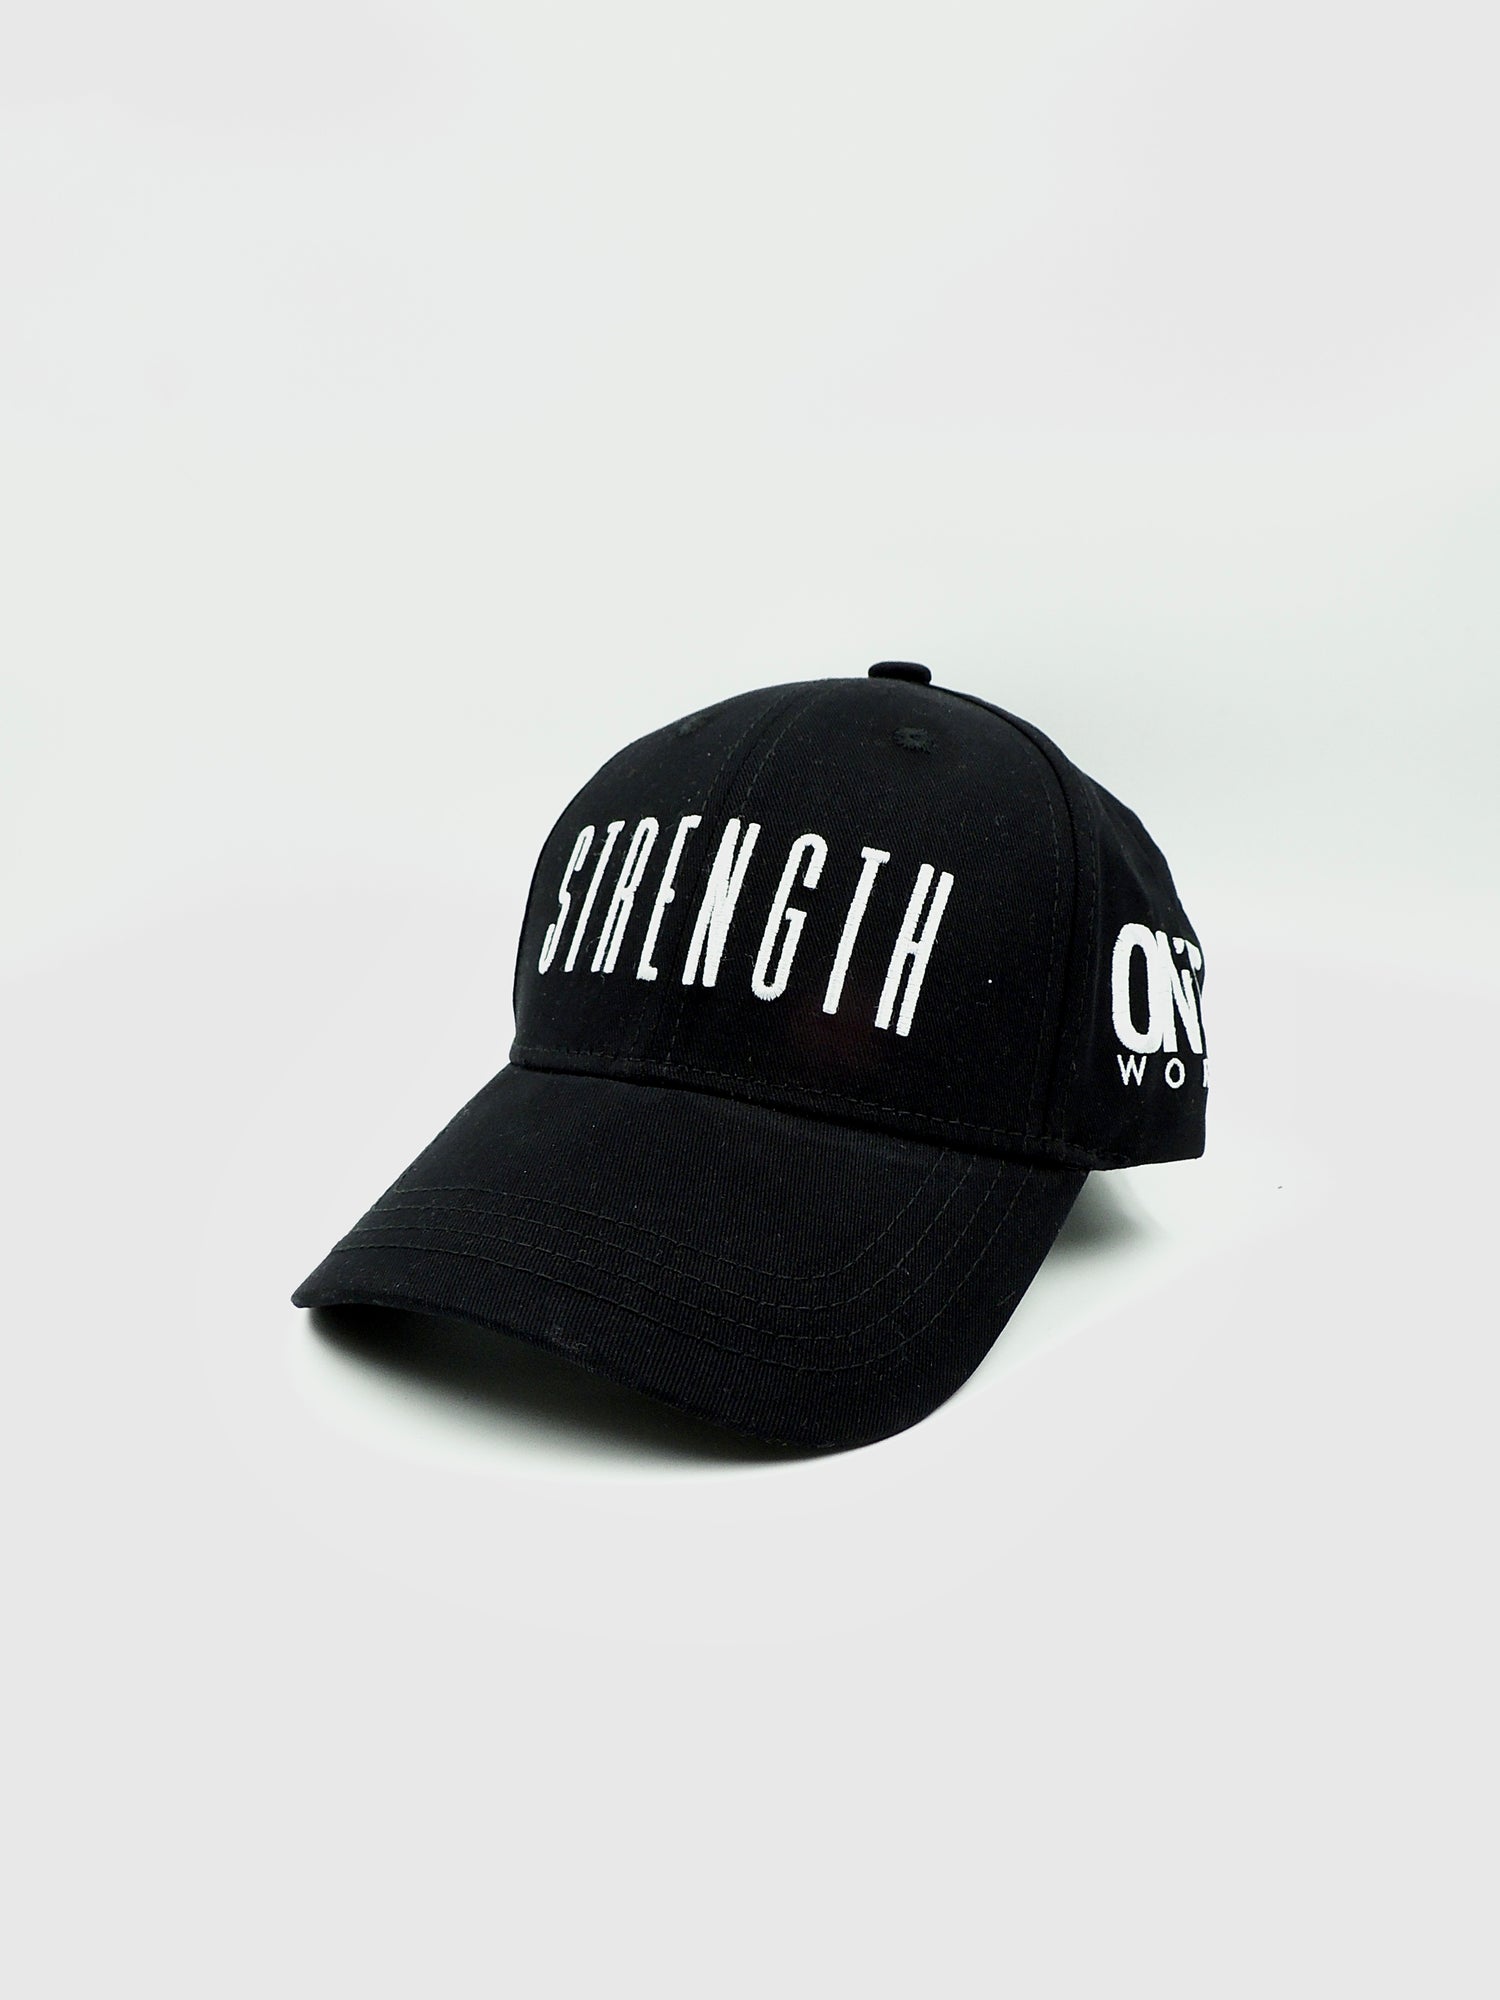 strength cap-One Word Store[product_title]